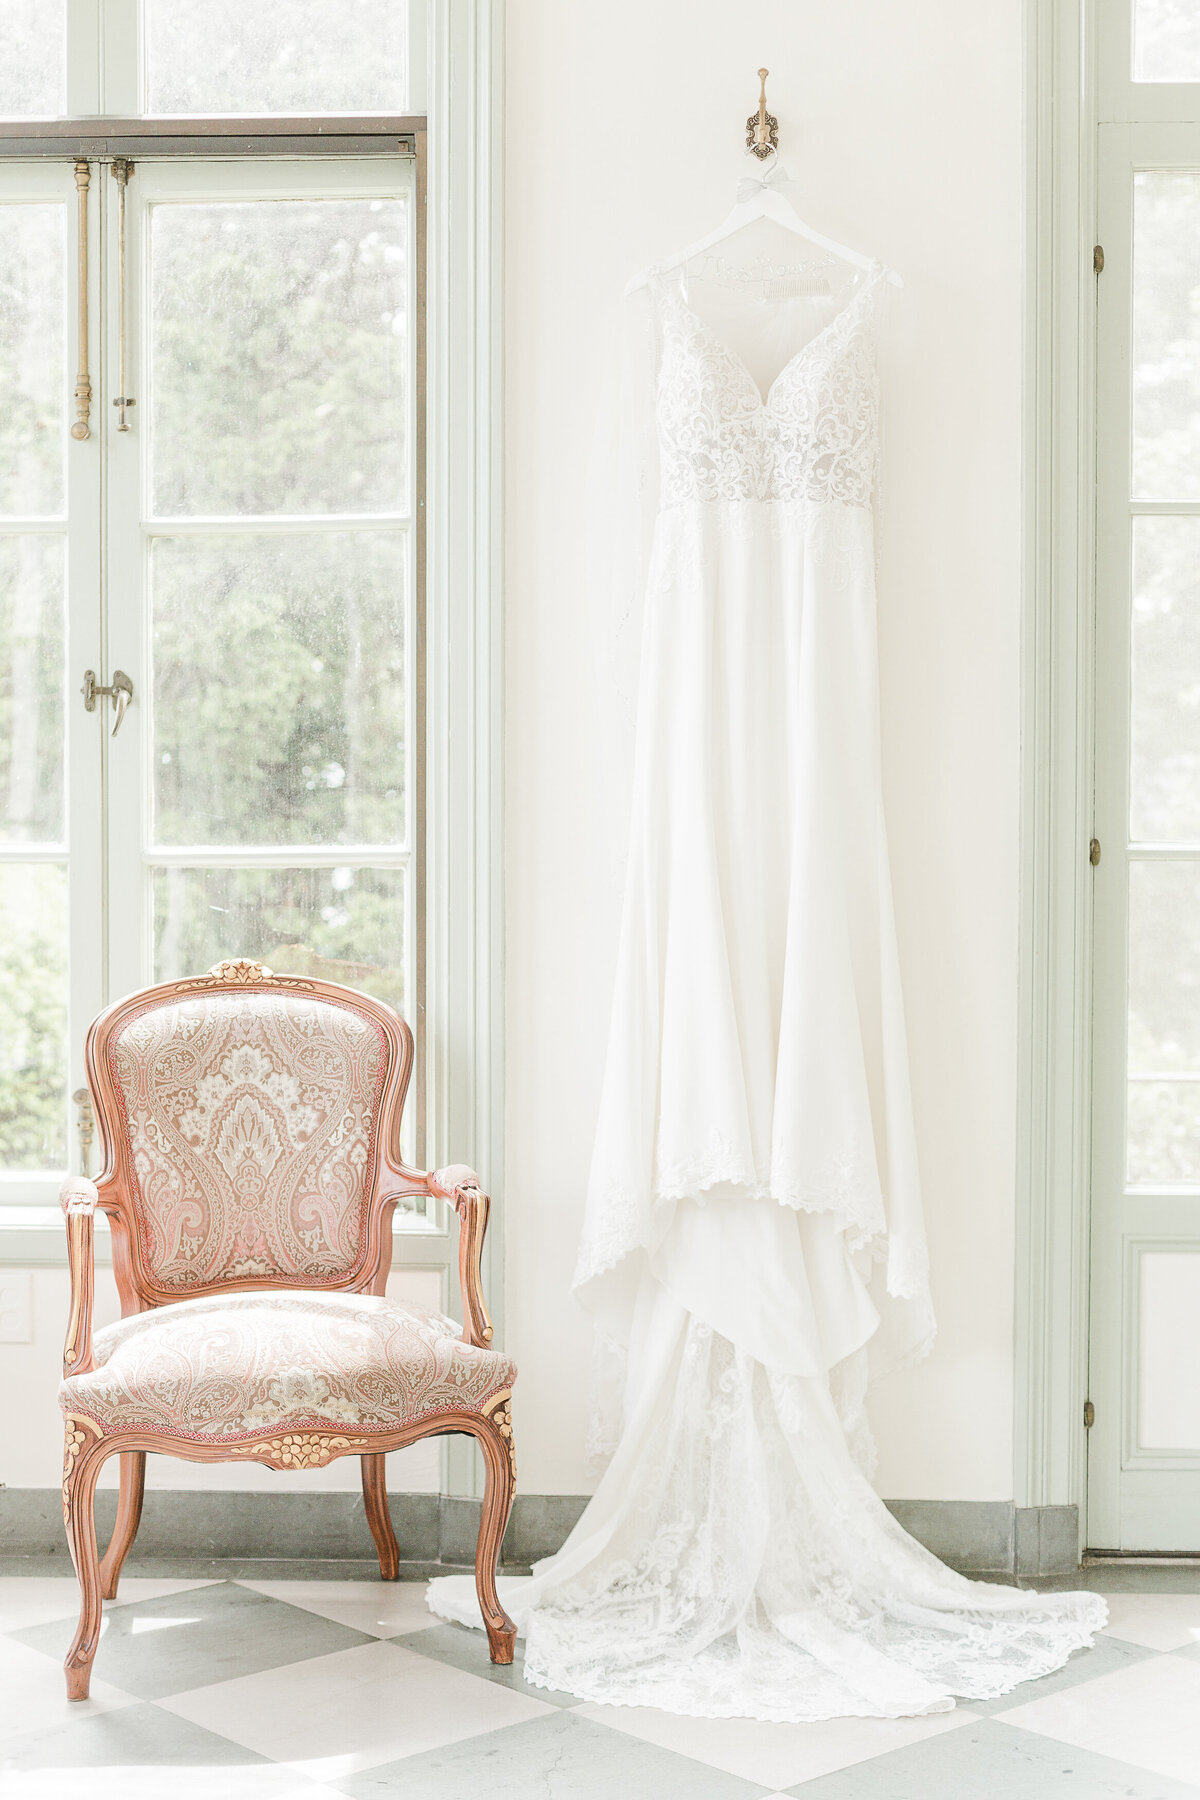 A wedding gown hangs for a detail image.